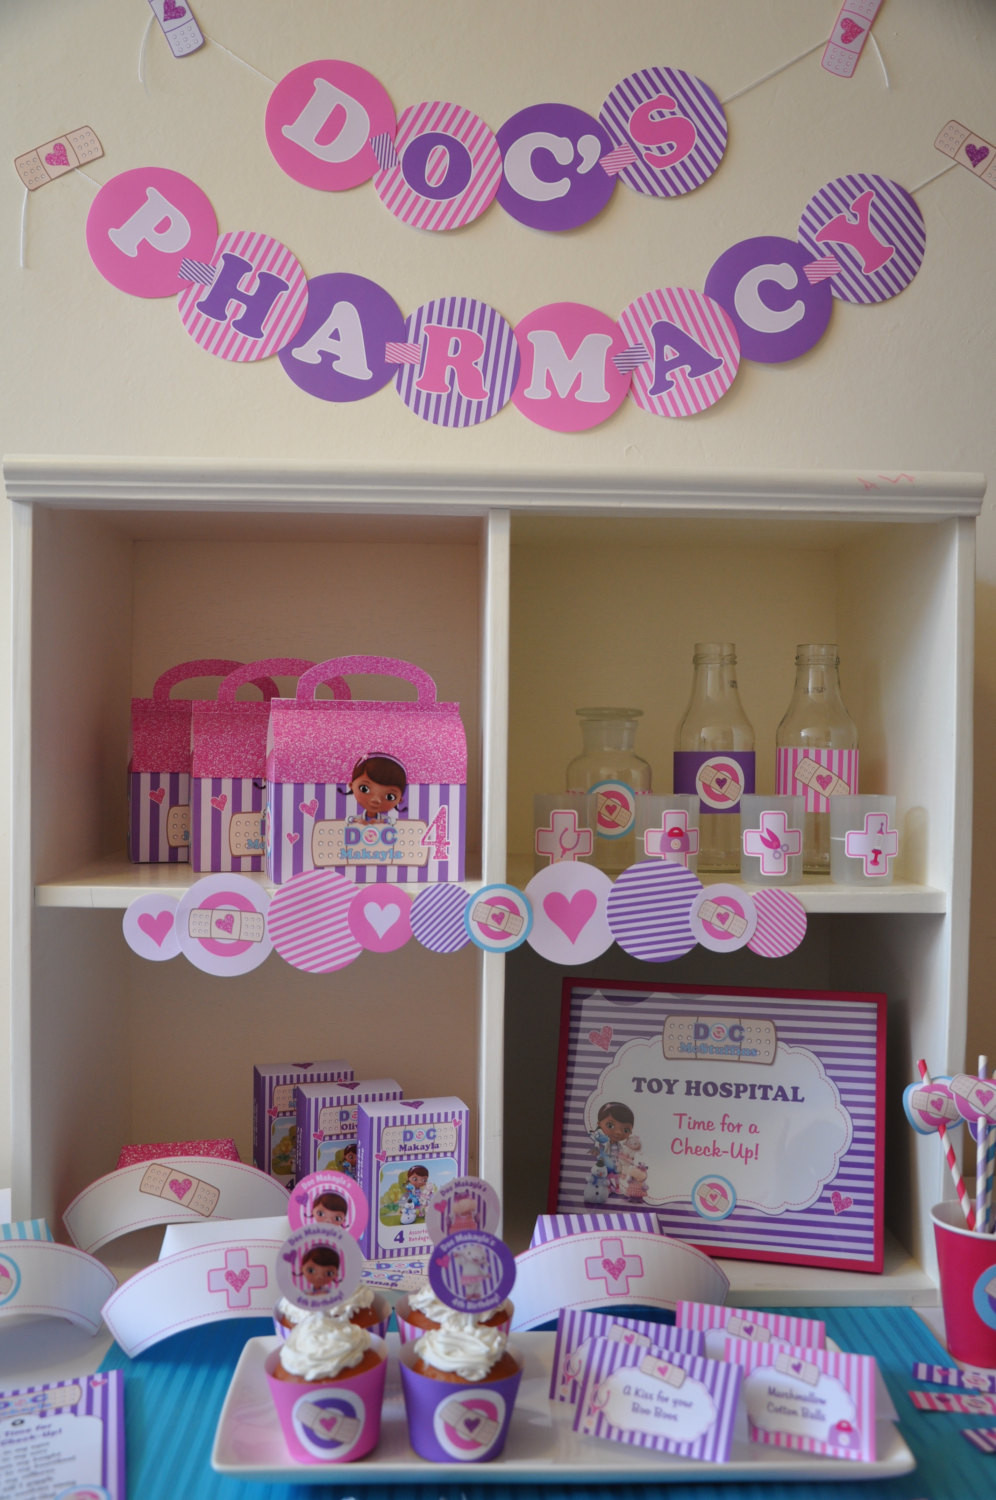 Doc Mcstuffins Birthday Party Decorations
 Doc McStuffins party decorations package PERSONALIZED Doctor